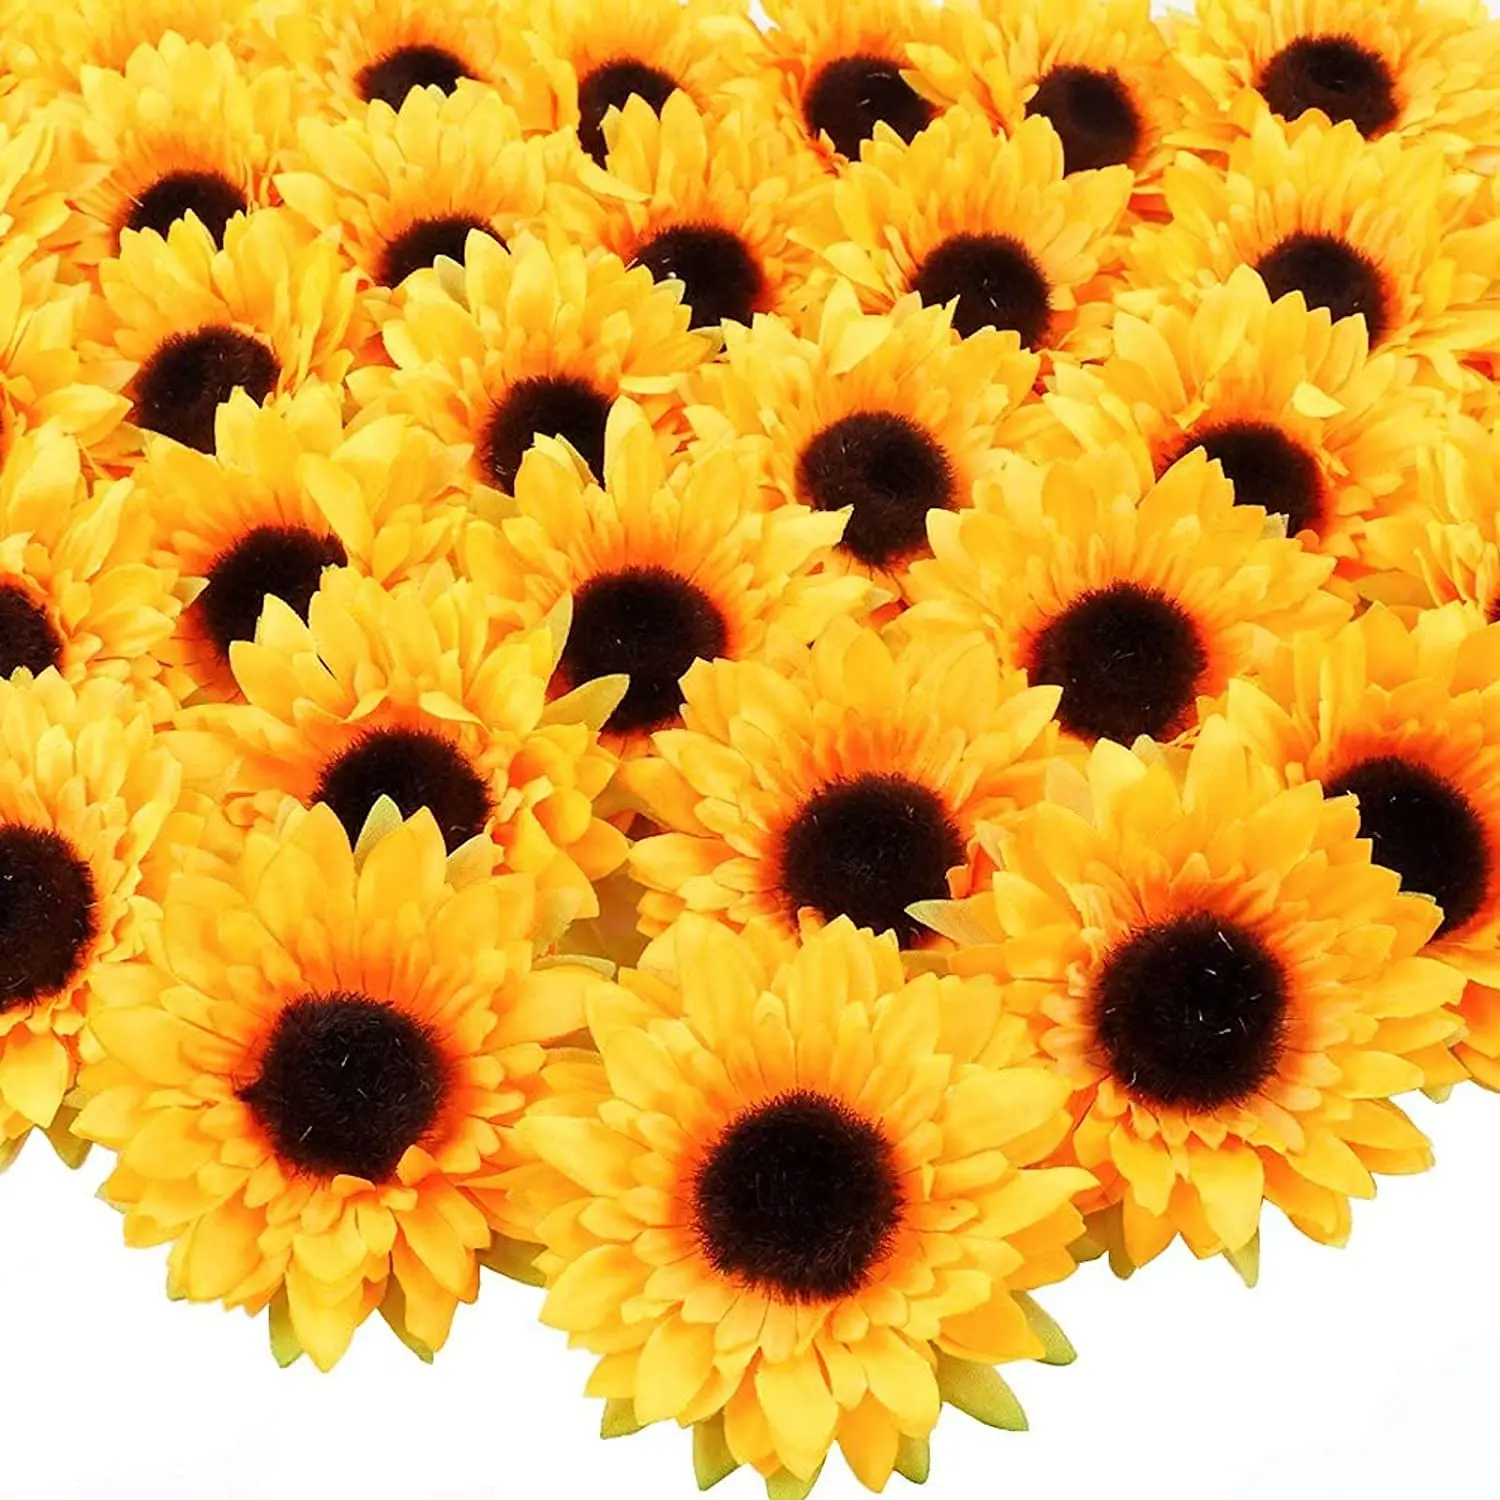 

30pcs 9CM Fake Sunflowers Artificial Sunflower Heads Faux Silk Sunflower Decoration for Christmas Tree Home Party Wedding Decor